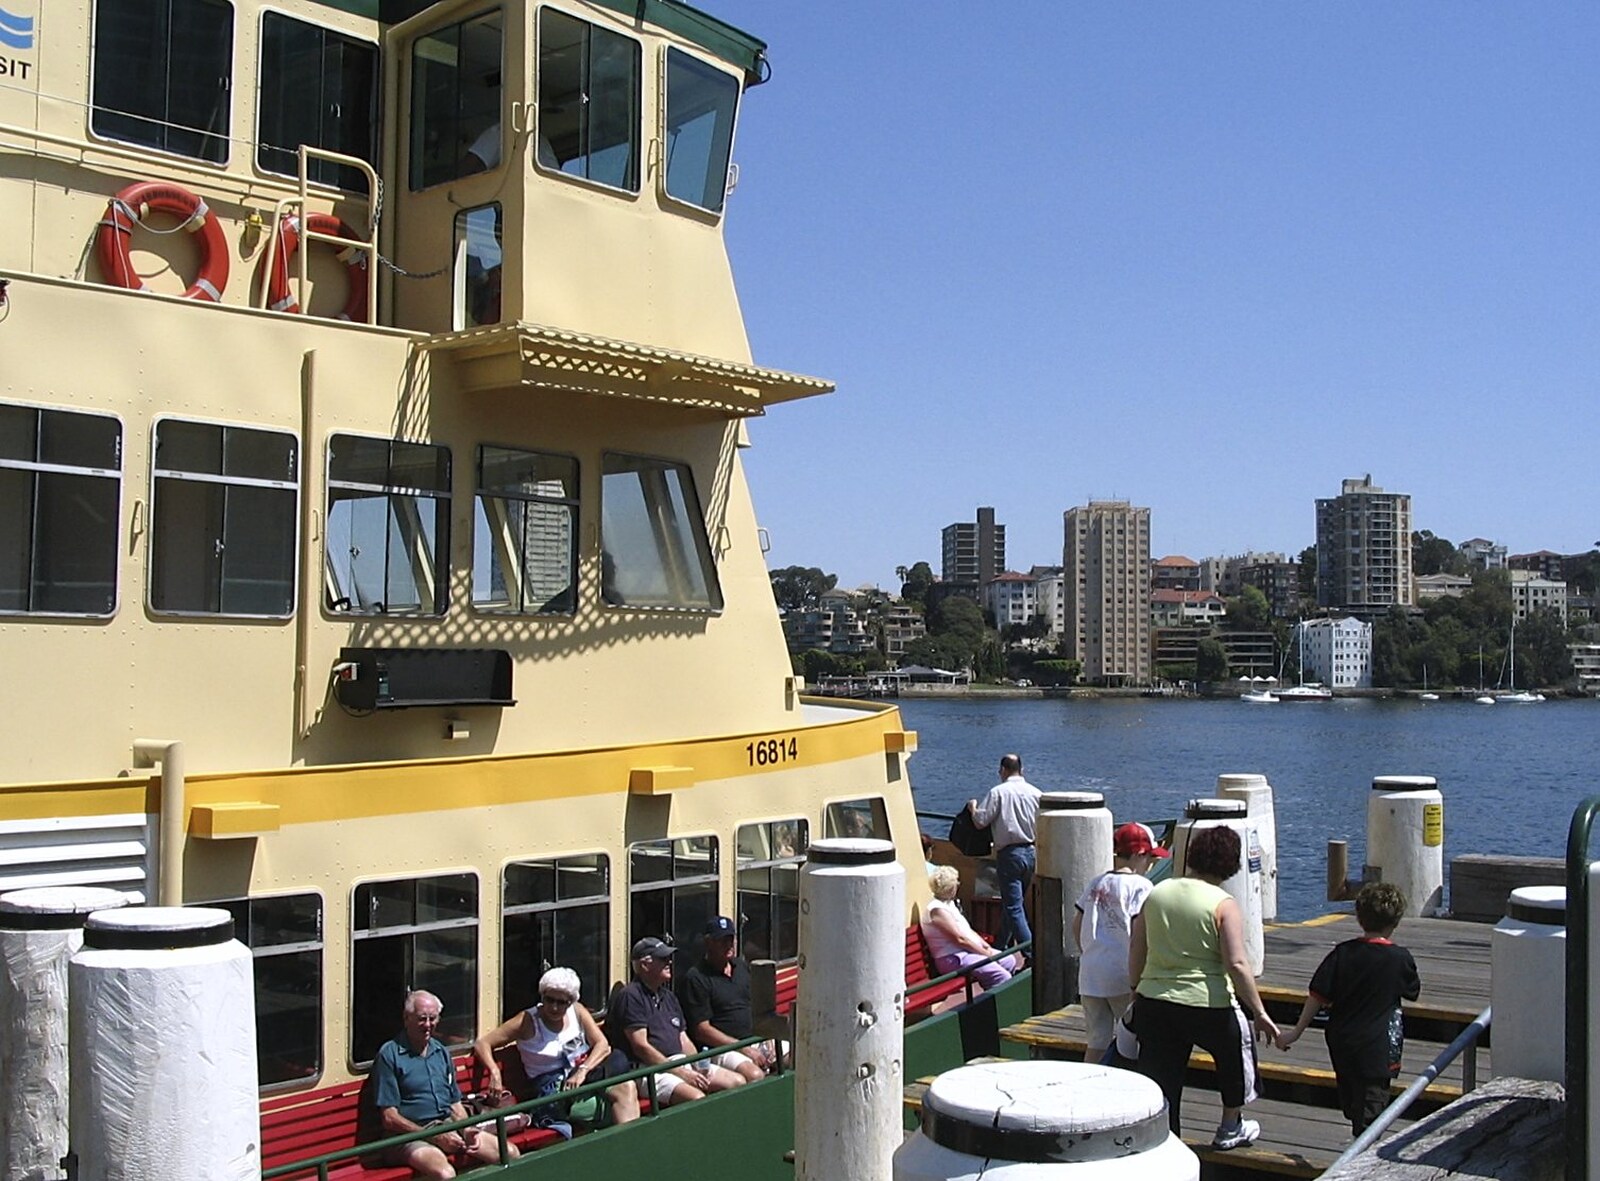 The ferry 'Charlotte' disembarks at Milson's Point from Sydney, New South Wales, Australia - 10th October 2004